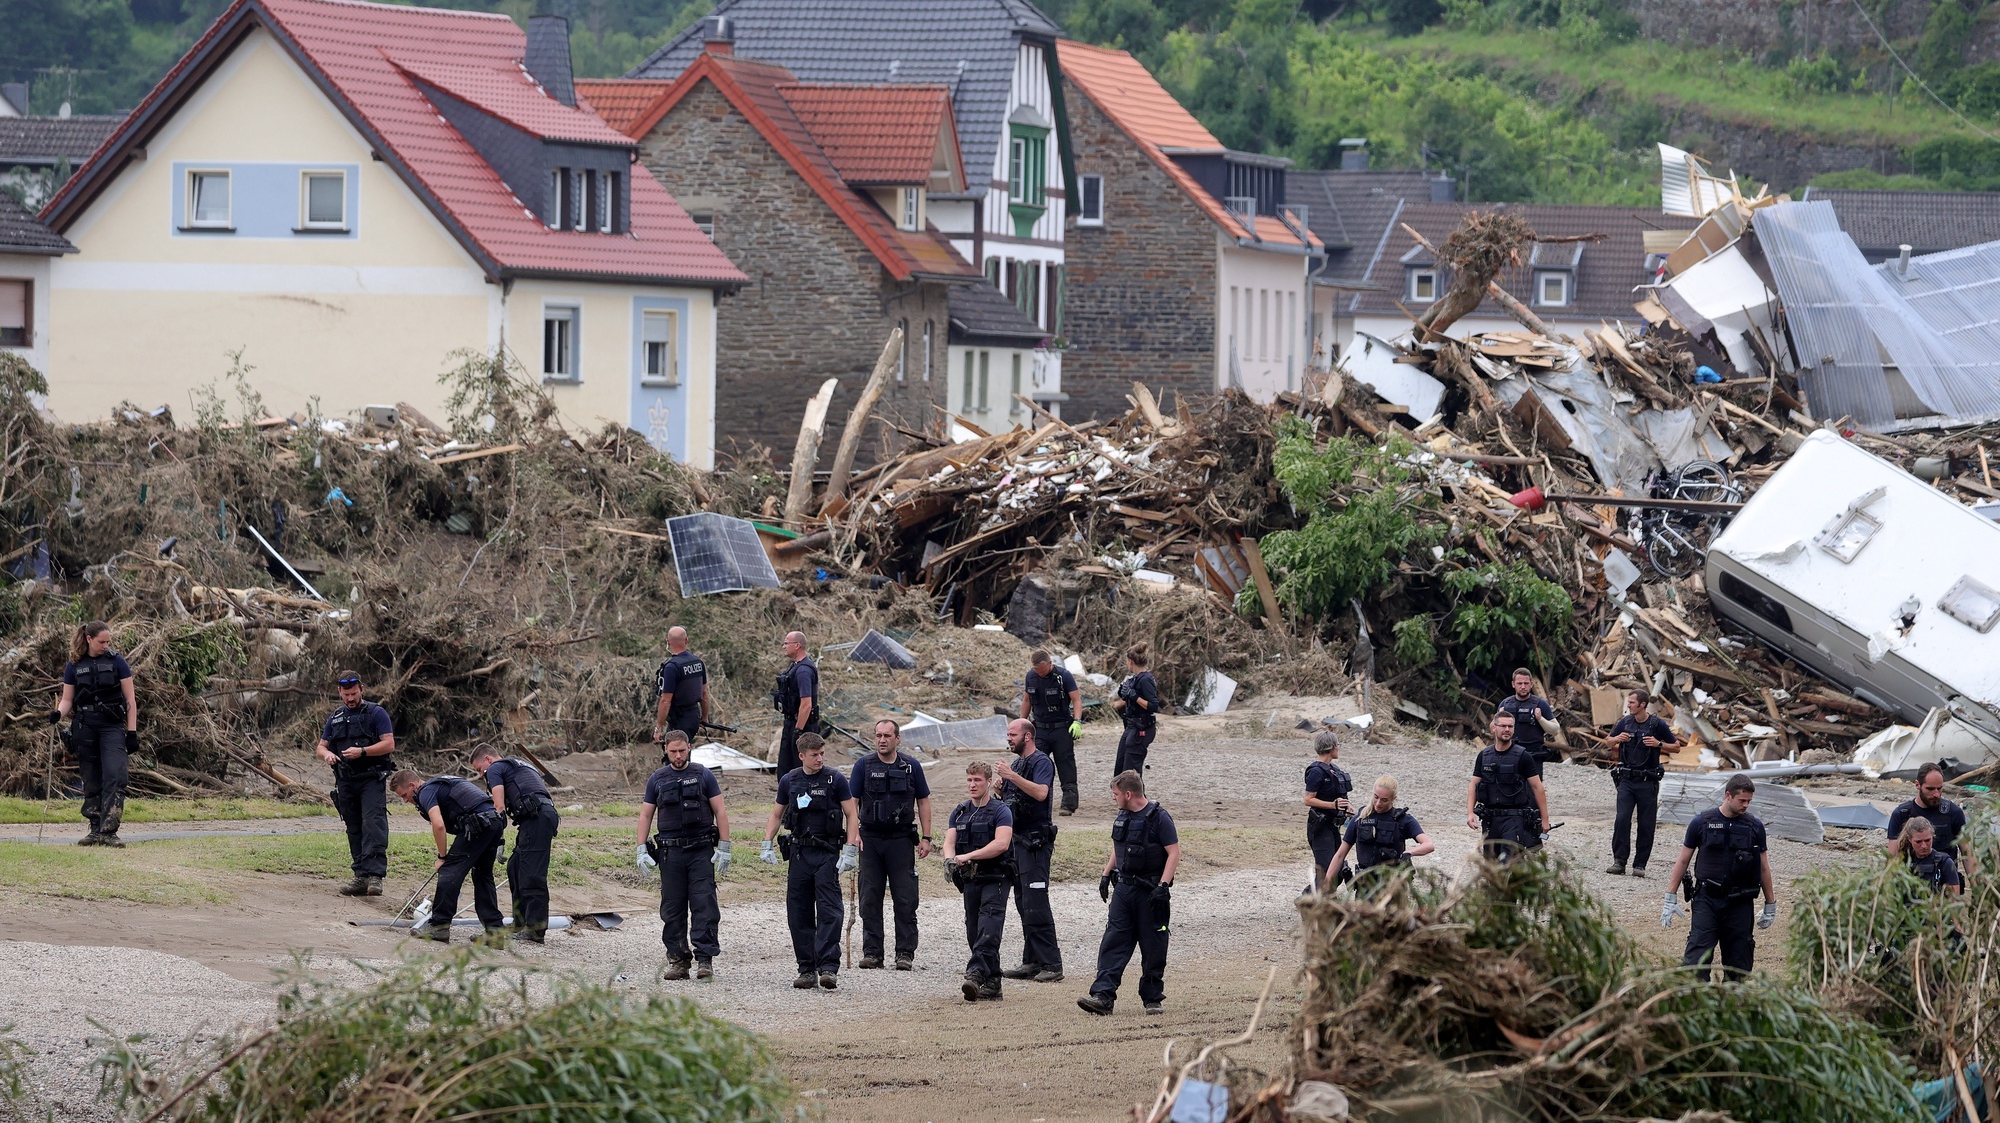 epa09353802 Police officers inspect the area after the flooding of the Ahr River, in Altenahr, Germany, 19 July 2021. Large parts of western Germany and central Europe were hit by flash floods in the night of 14 to 15 July, following days of continuous rain that destroyed buildings and swept away cars. The total number of victims in the flood disaster in western Germany rises to at least 164, with many hundreds still missing.  EPA/FRIEDEMANN VOGEL